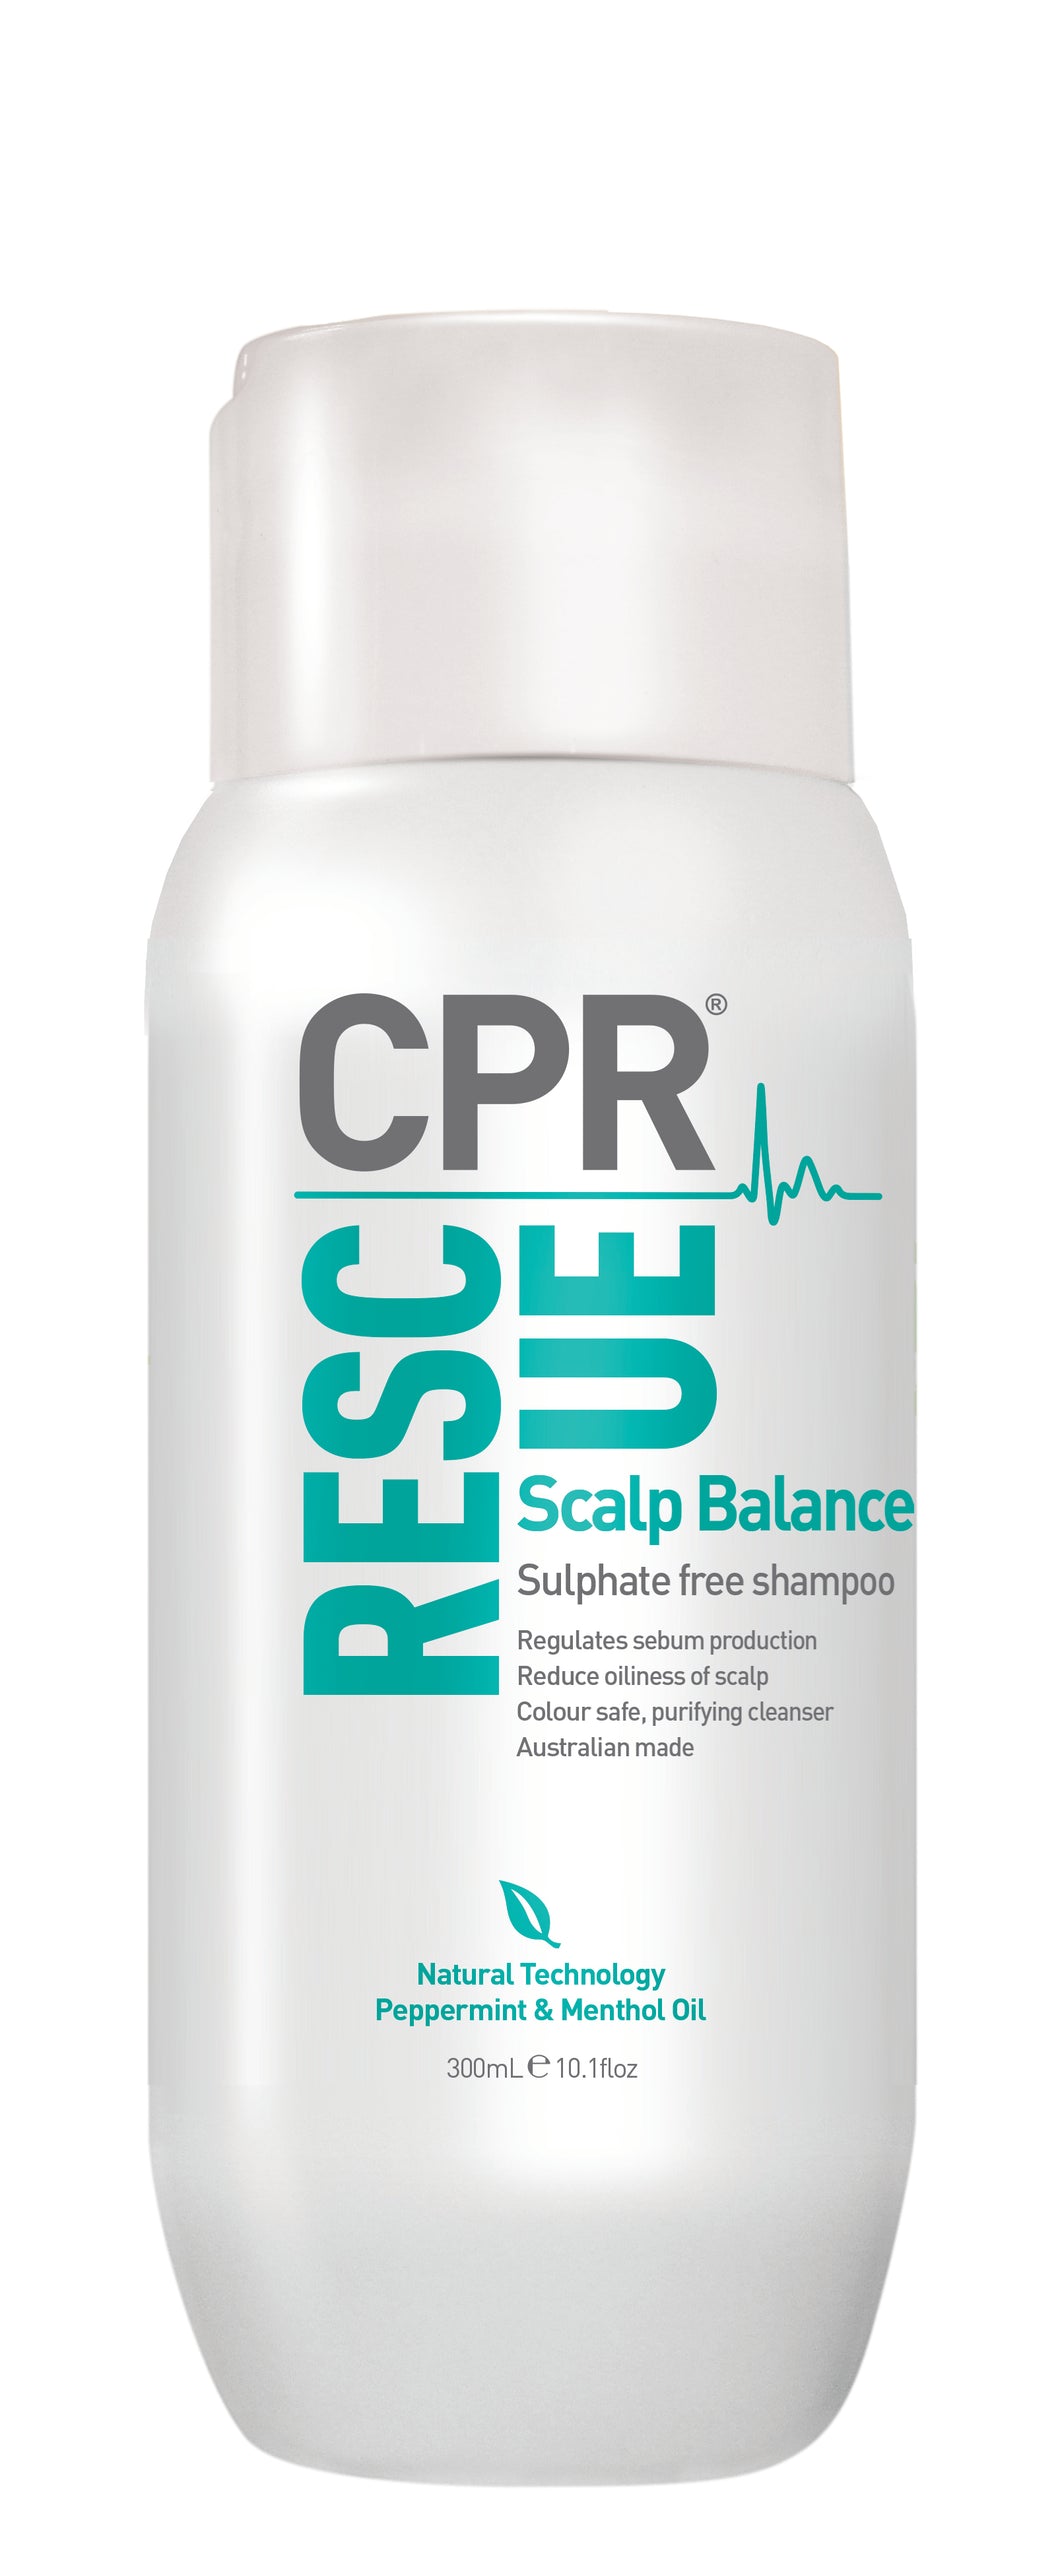 CPR Rescue Scalp Balance Sulphate Free Shampoo 300mL